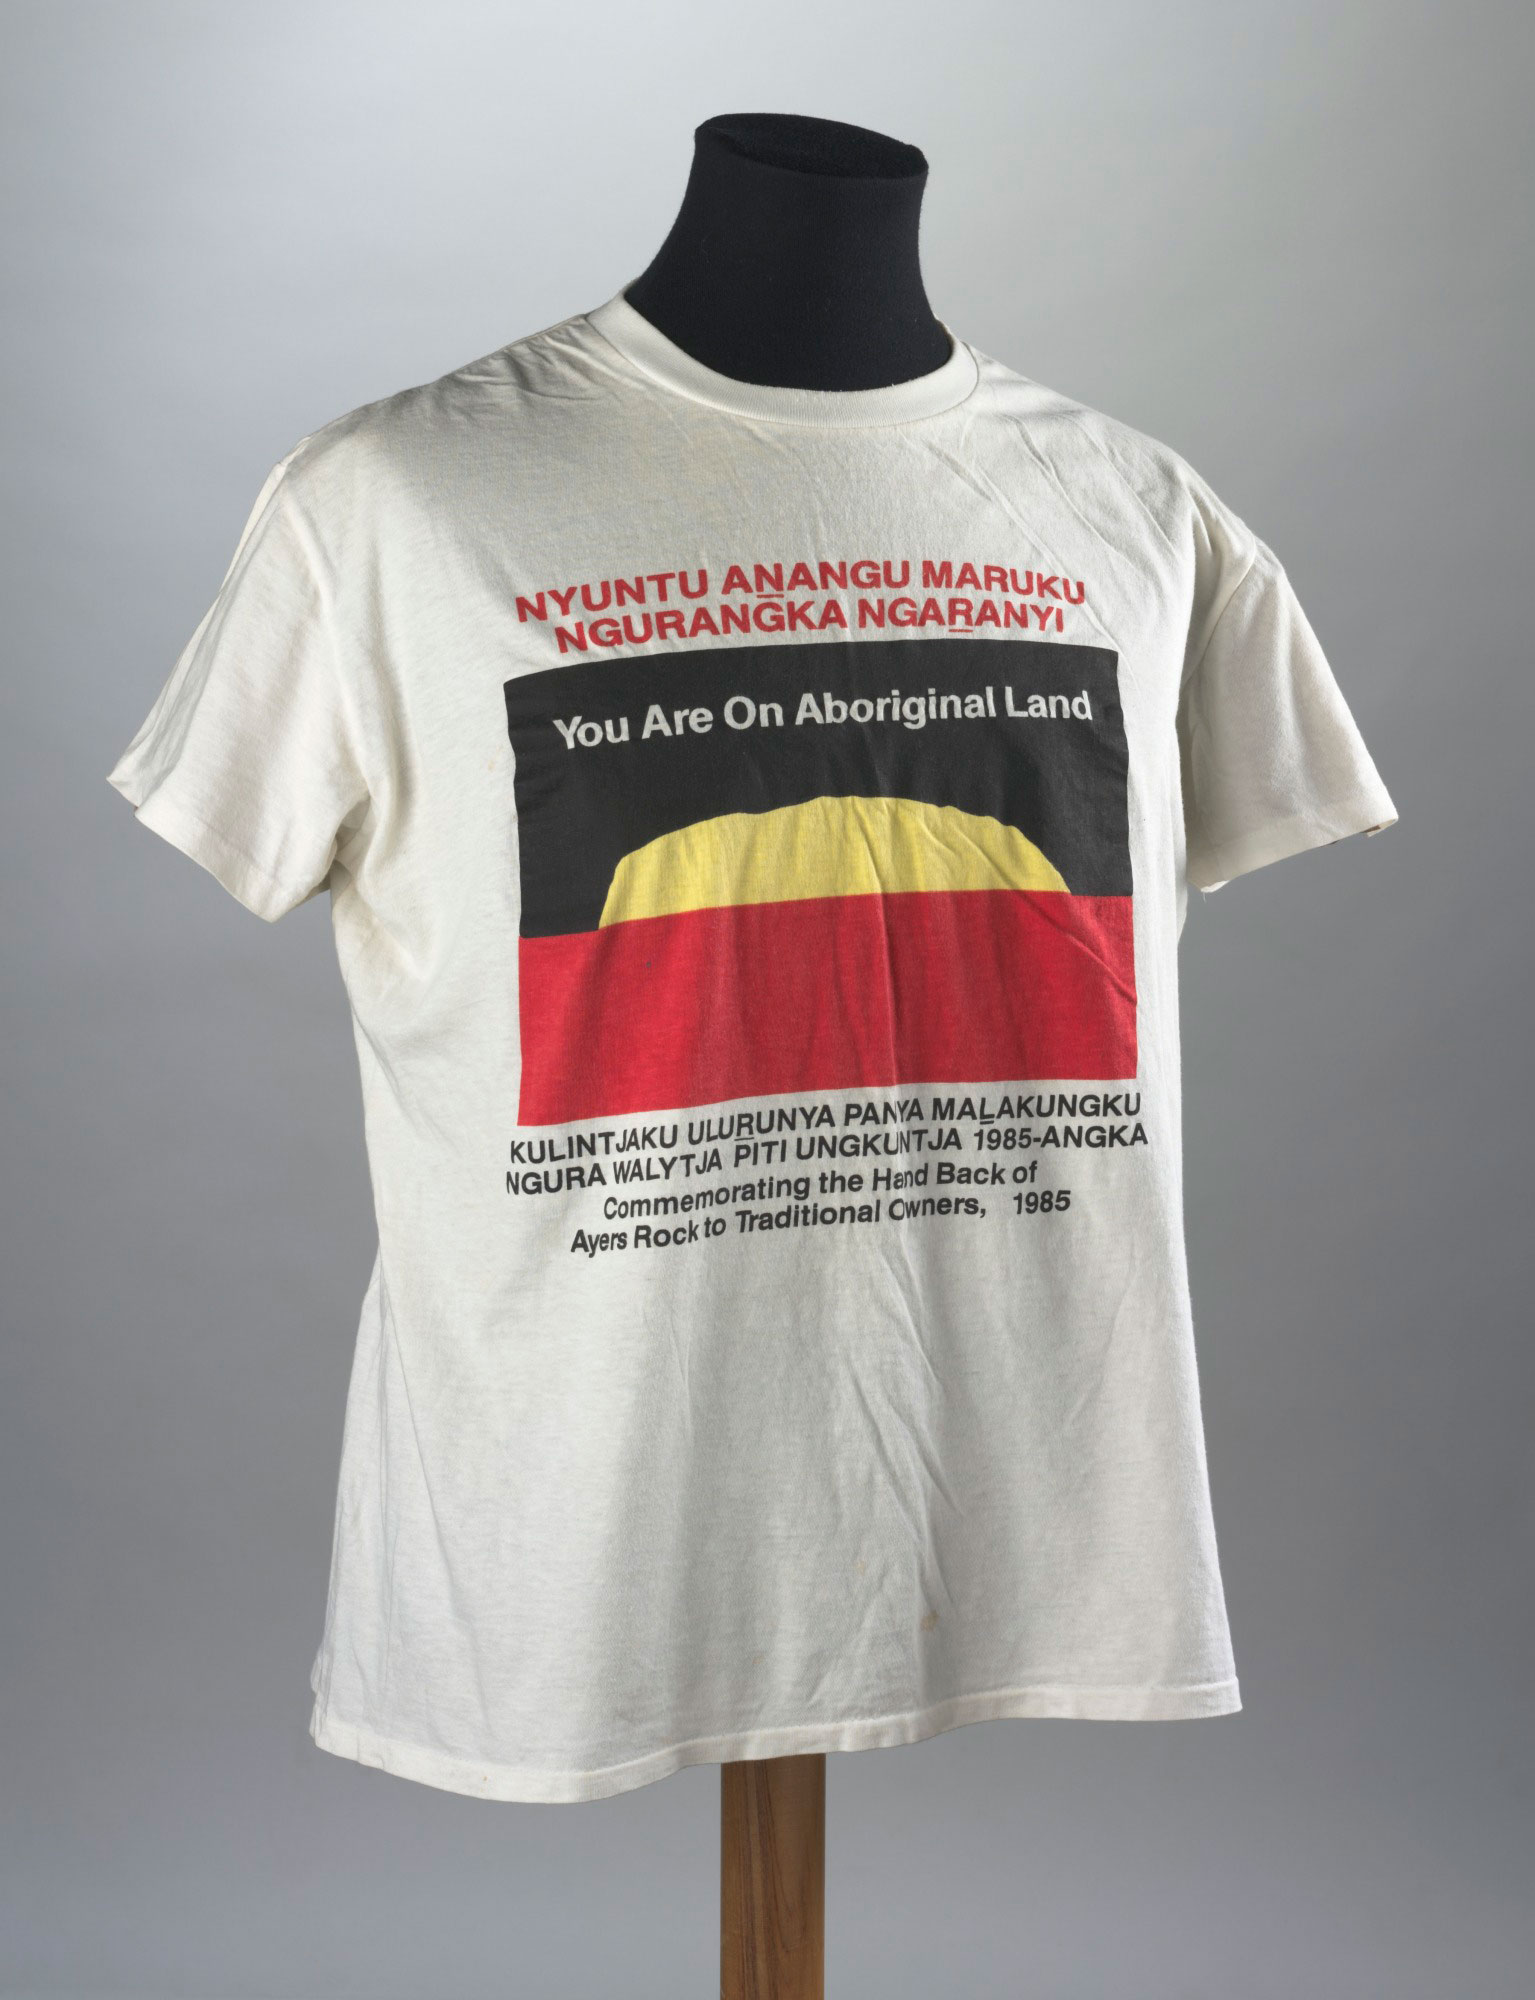 ‘You Are On Aboriginal Land’ t-shirt.